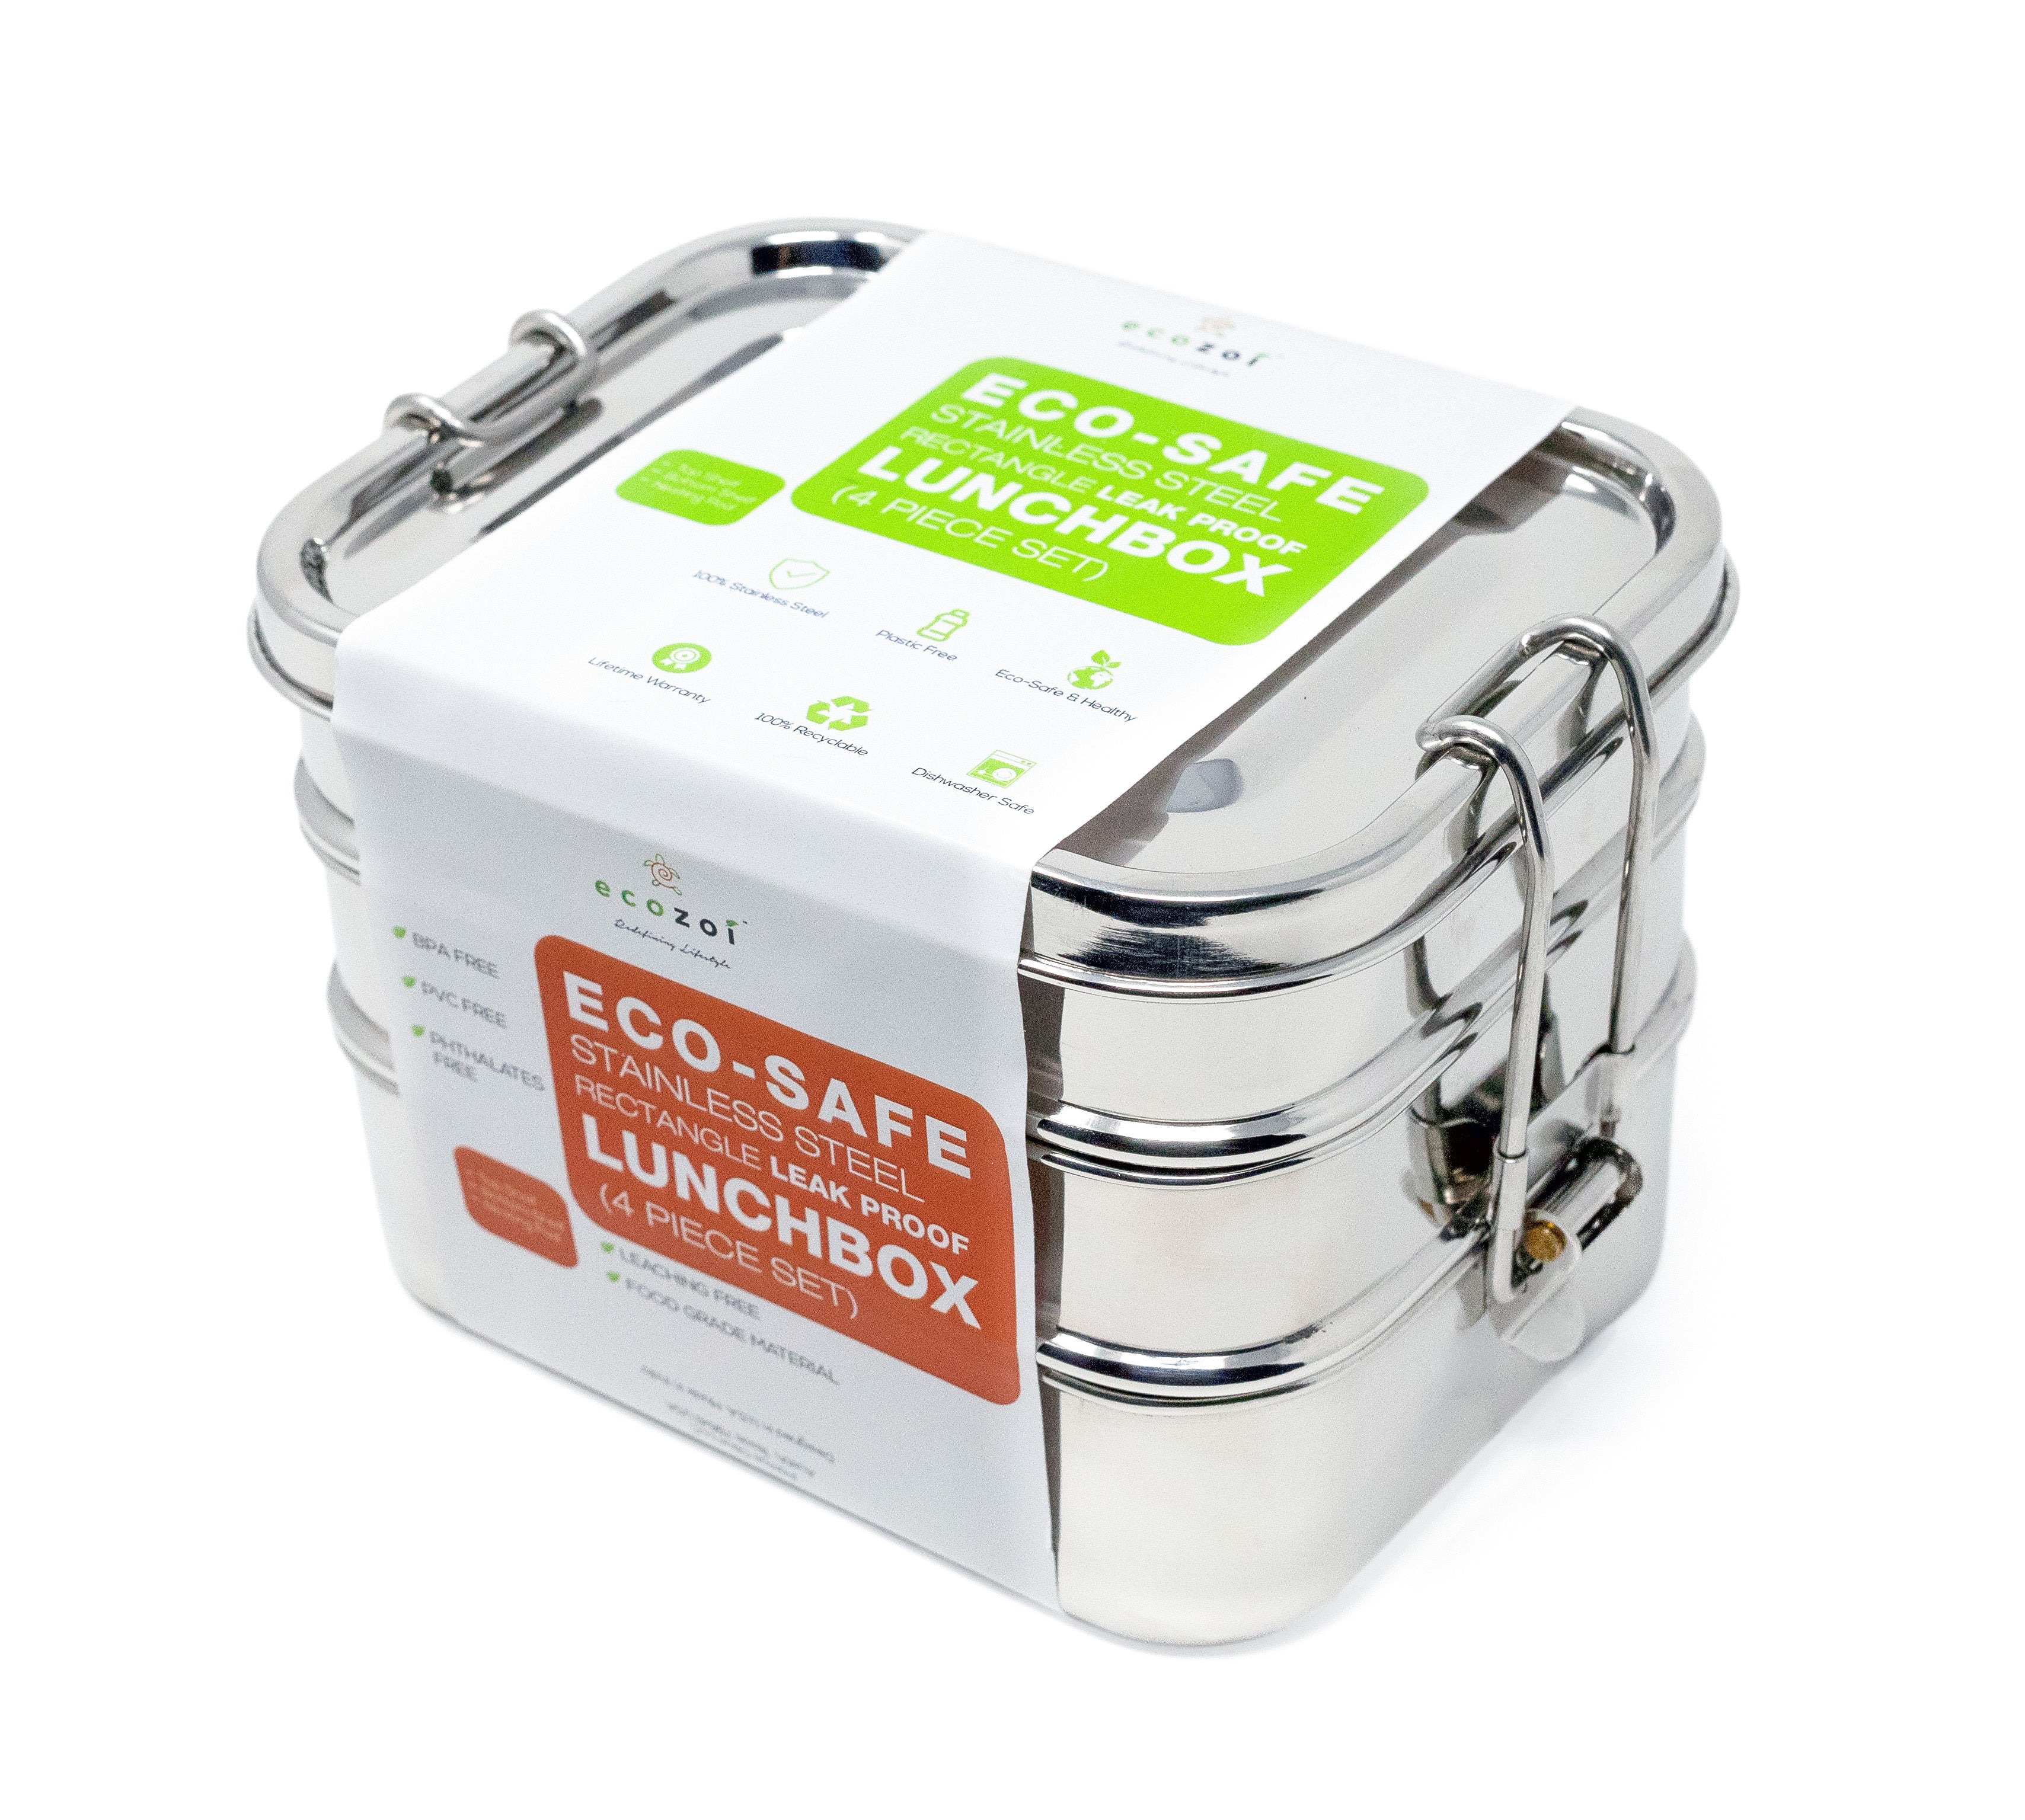 Lunch Box For Kids And Adults, Stainless Steel Lunch Box With 3 Compartments  With Spoon Slot 2041.